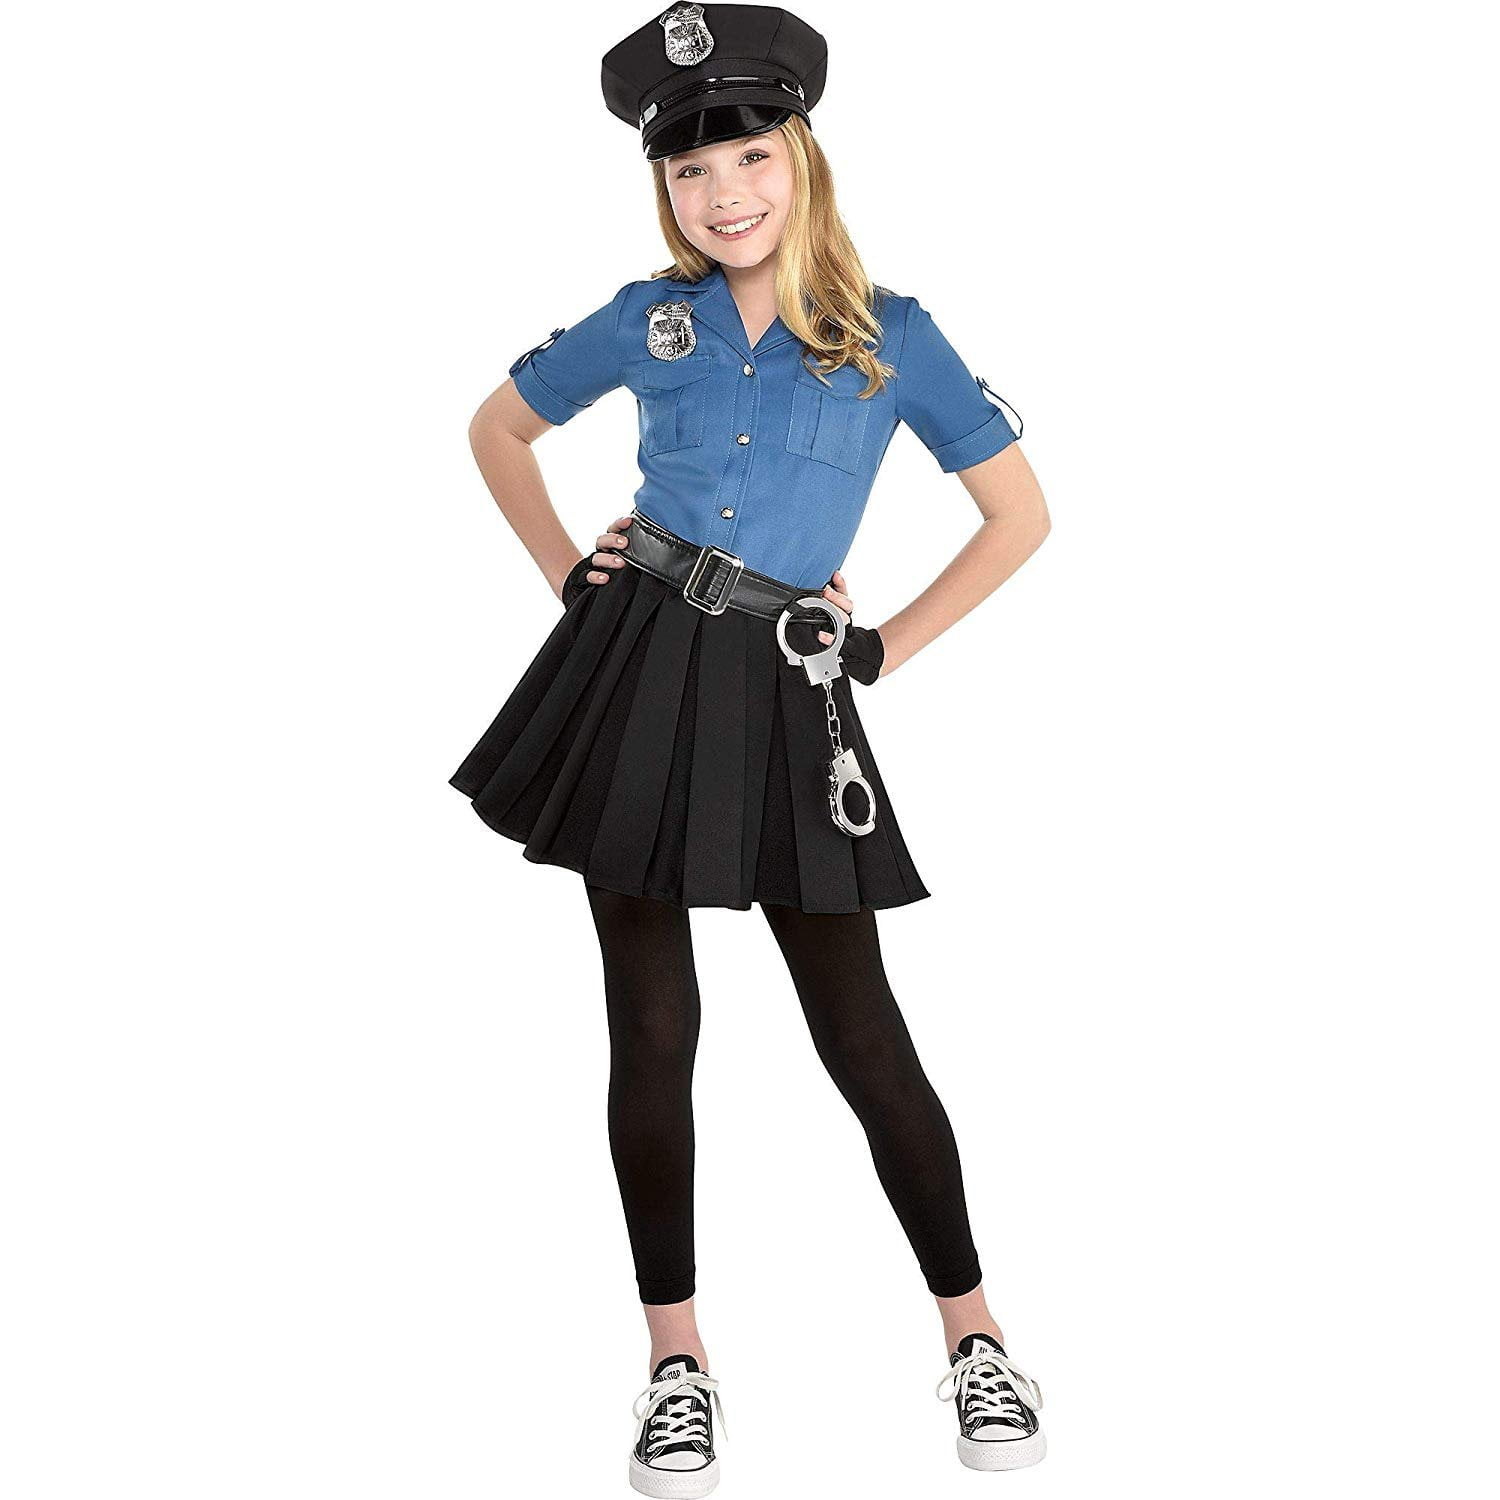 Police Dress Halloween Costume for Girls, Small, with Included ...